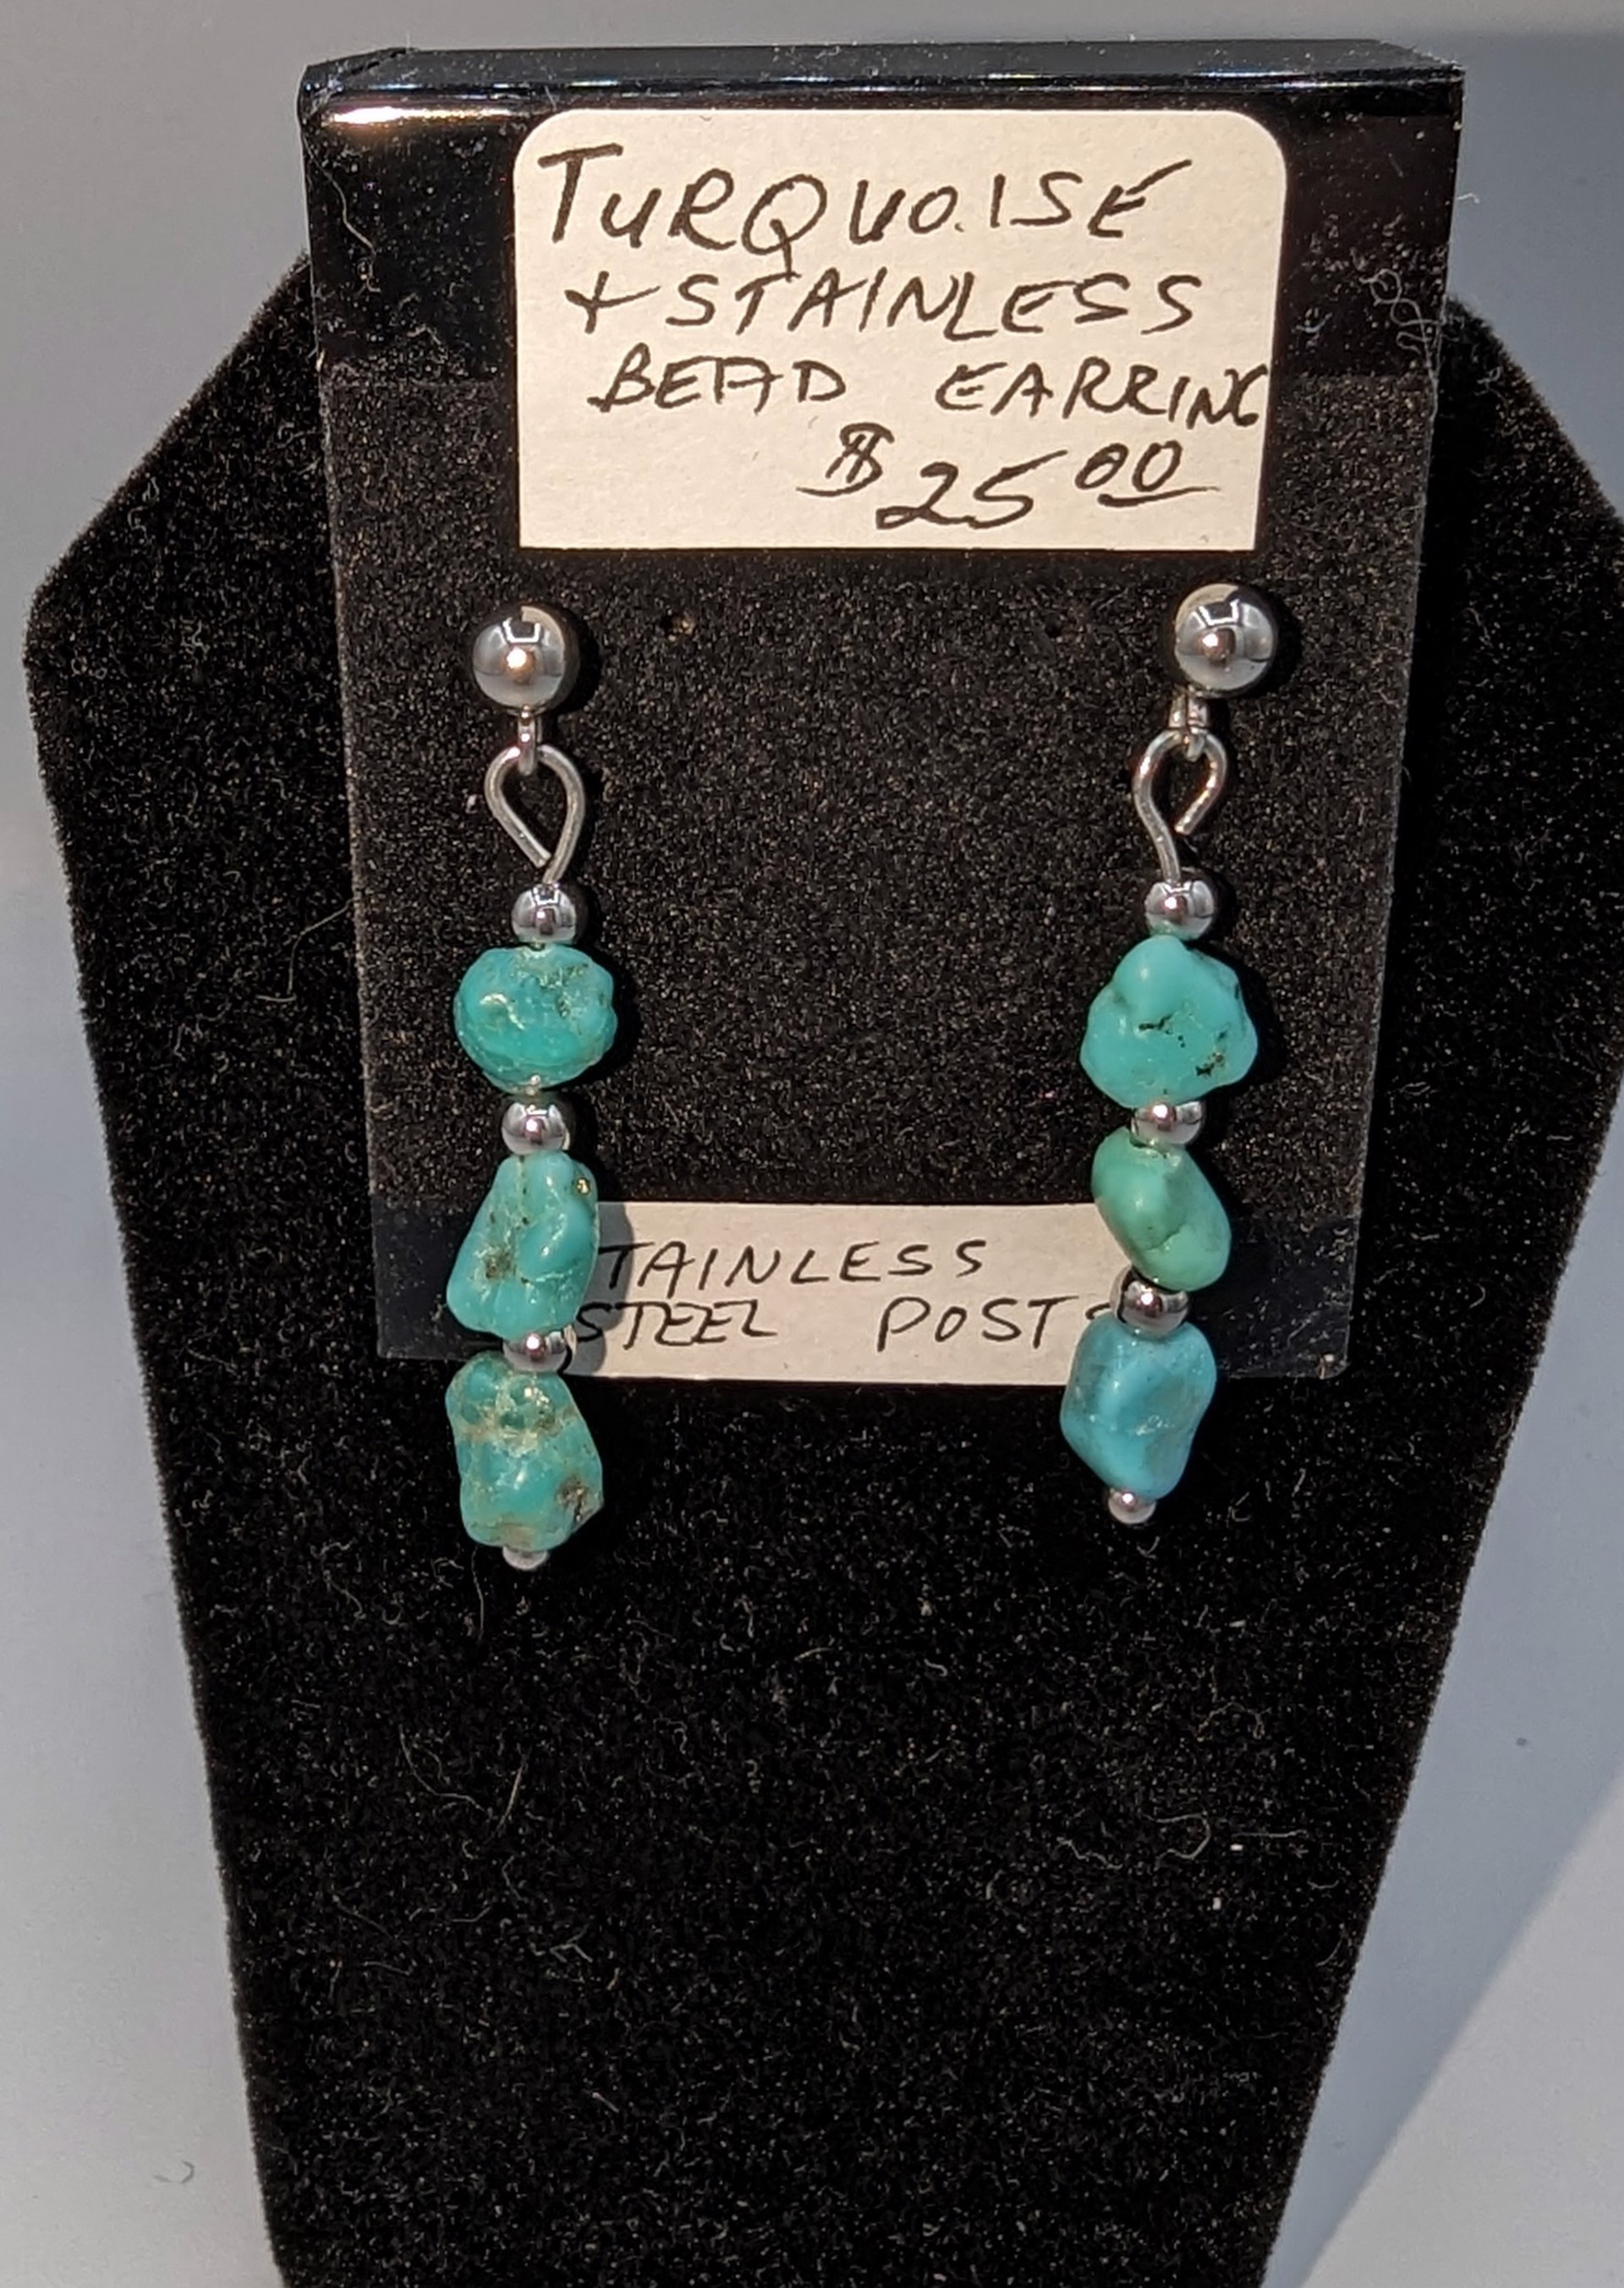 Turquoise & Stainless bead earrings by Betty Binder